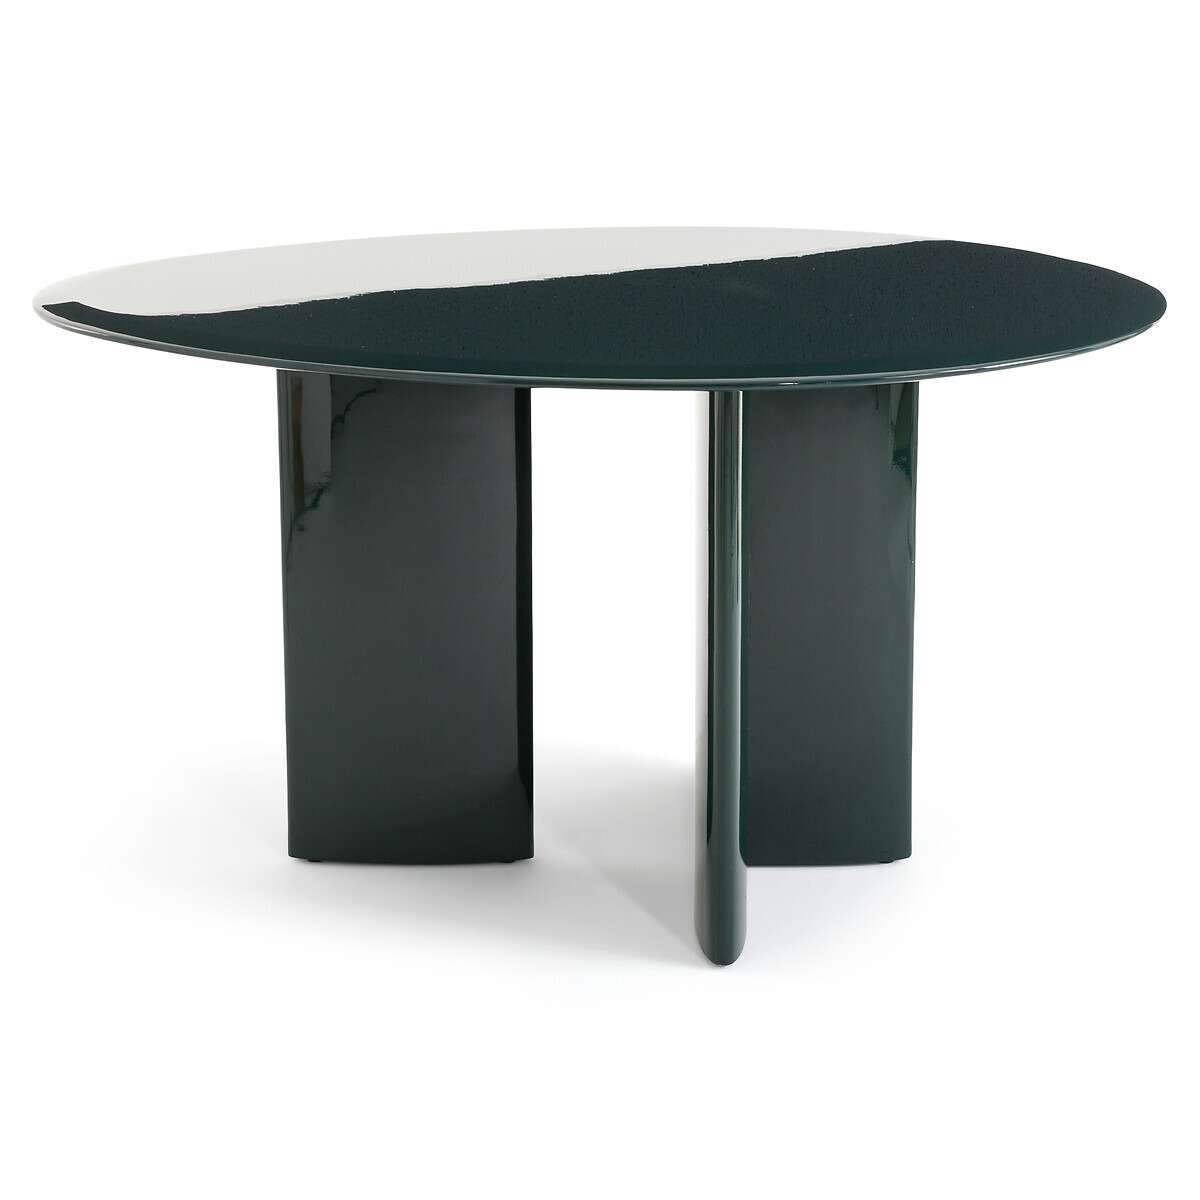 Laki Lacquered Dining Table (Seats 4) - image 1